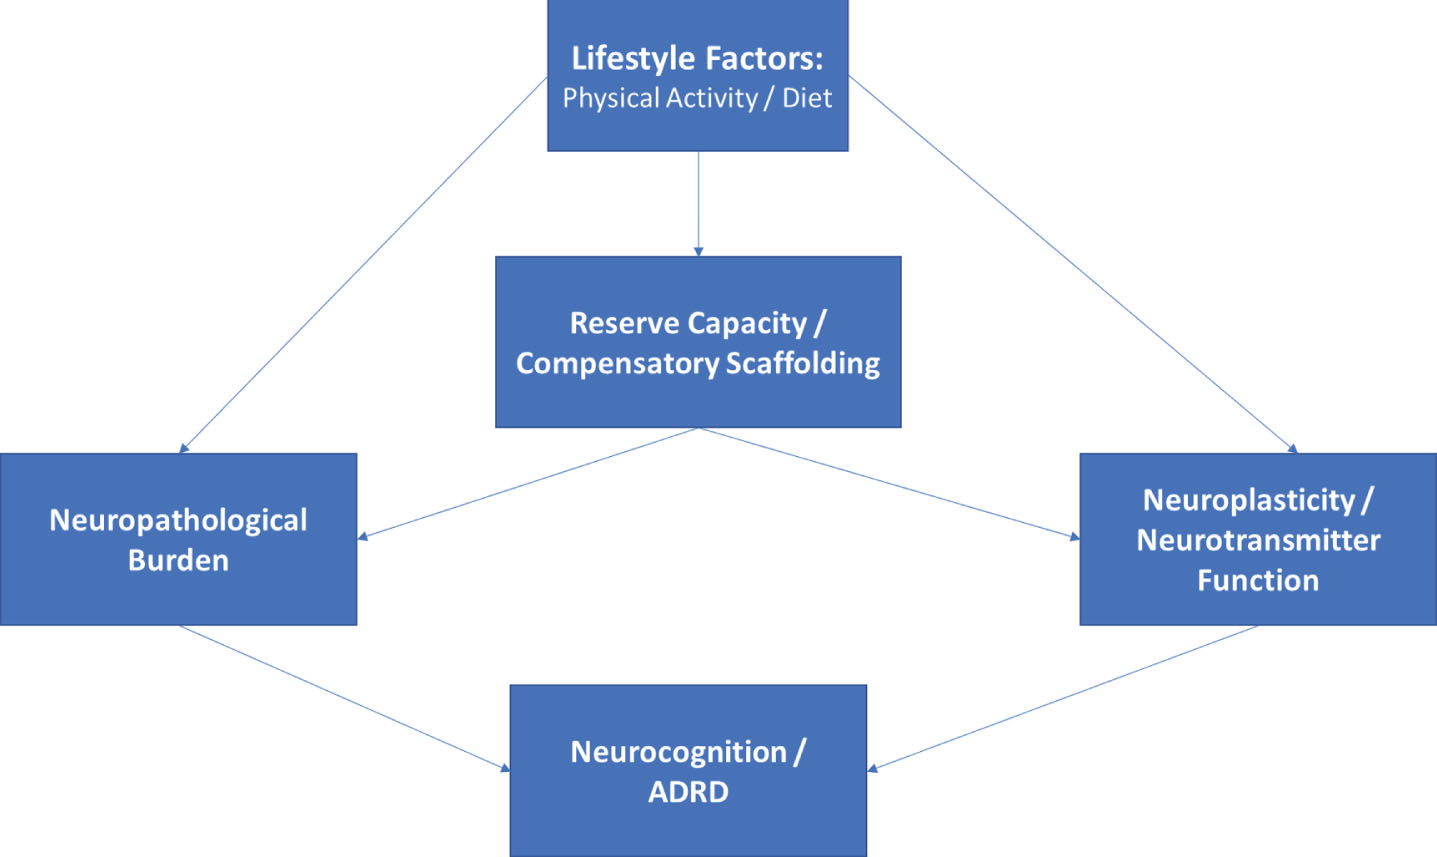 Directed acyclic graph linking lifestyle modification to neurocognitive outcomes. As shown, lifestyle modification likely has beneficial effects on structural markers of neuropathology, reserve capacities, and more directly on neurotransmitter systems, all of which contribute to neurocognitive function as observed through behavioral testing. The associations between markers of reserve capacity and/or scaffolding (i.e. blood brain barrier integrity, cerebrovascular reactivity, neurogenesis) likely impact neurocognition indirectly through their influence on structural markers and by potentiating or blunting neurotransmitter systems.